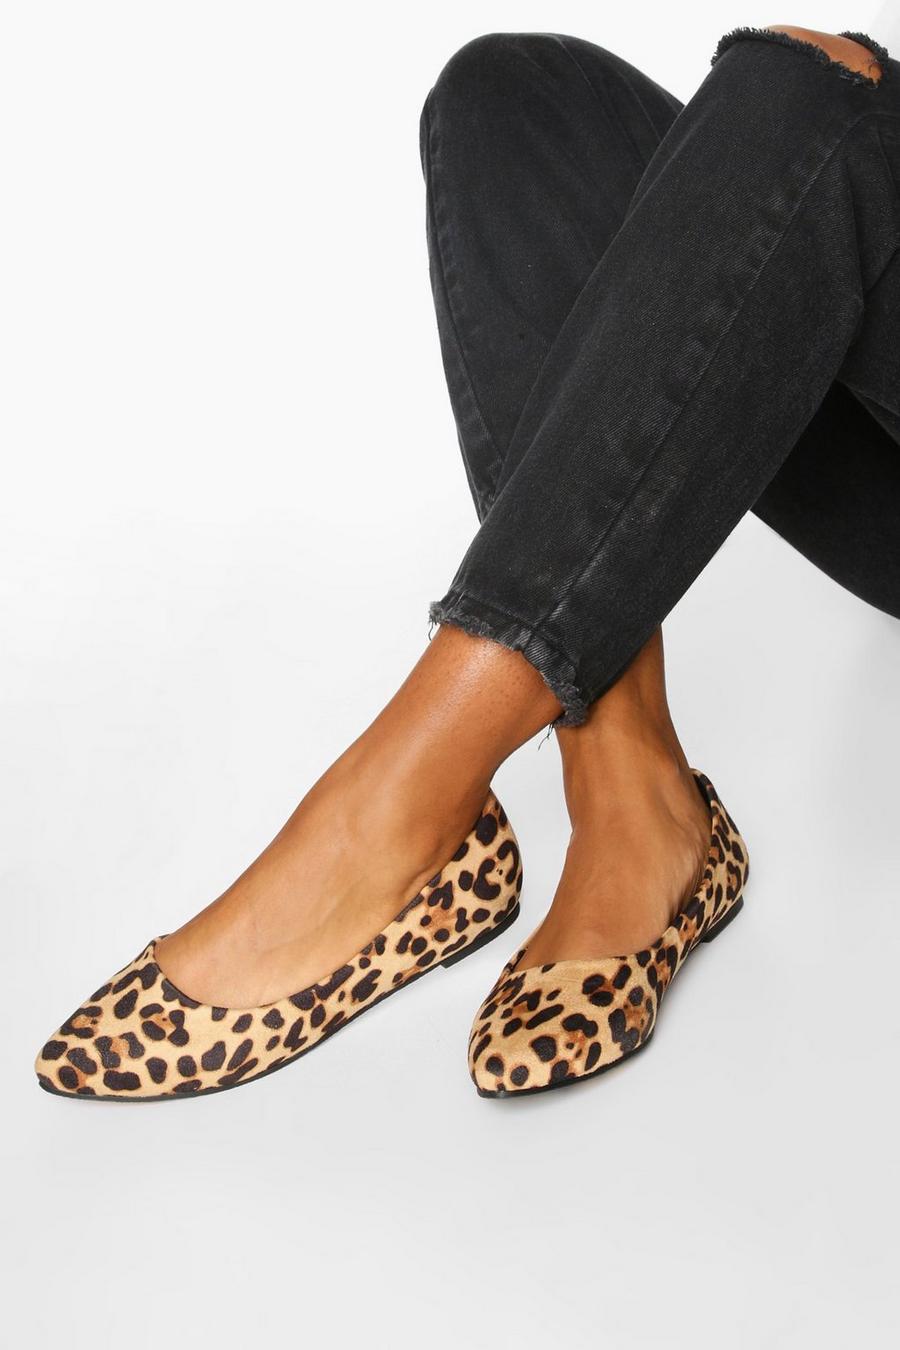 Shoes Womens Shoes Slip Ons Pointed Toe Flats Pointed Toe Flats in Leopard Print Handmade to Order Leather Or Vegan 